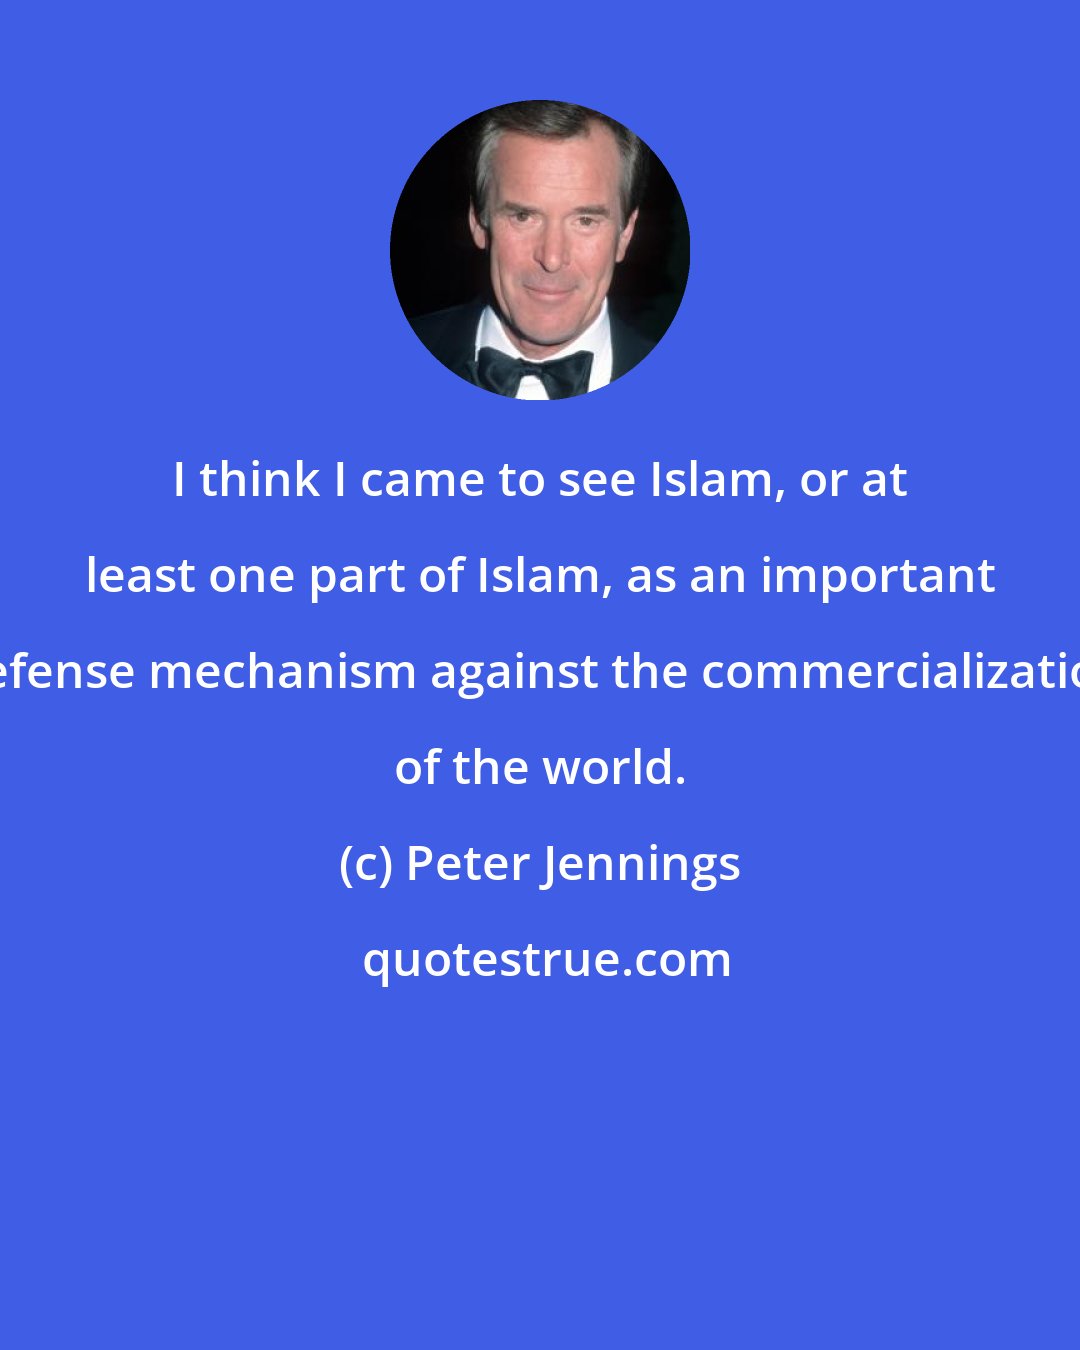 Peter Jennings: I think I came to see Islam, or at least one part of Islam, as an important defense mechanism against the commercialization of the world.